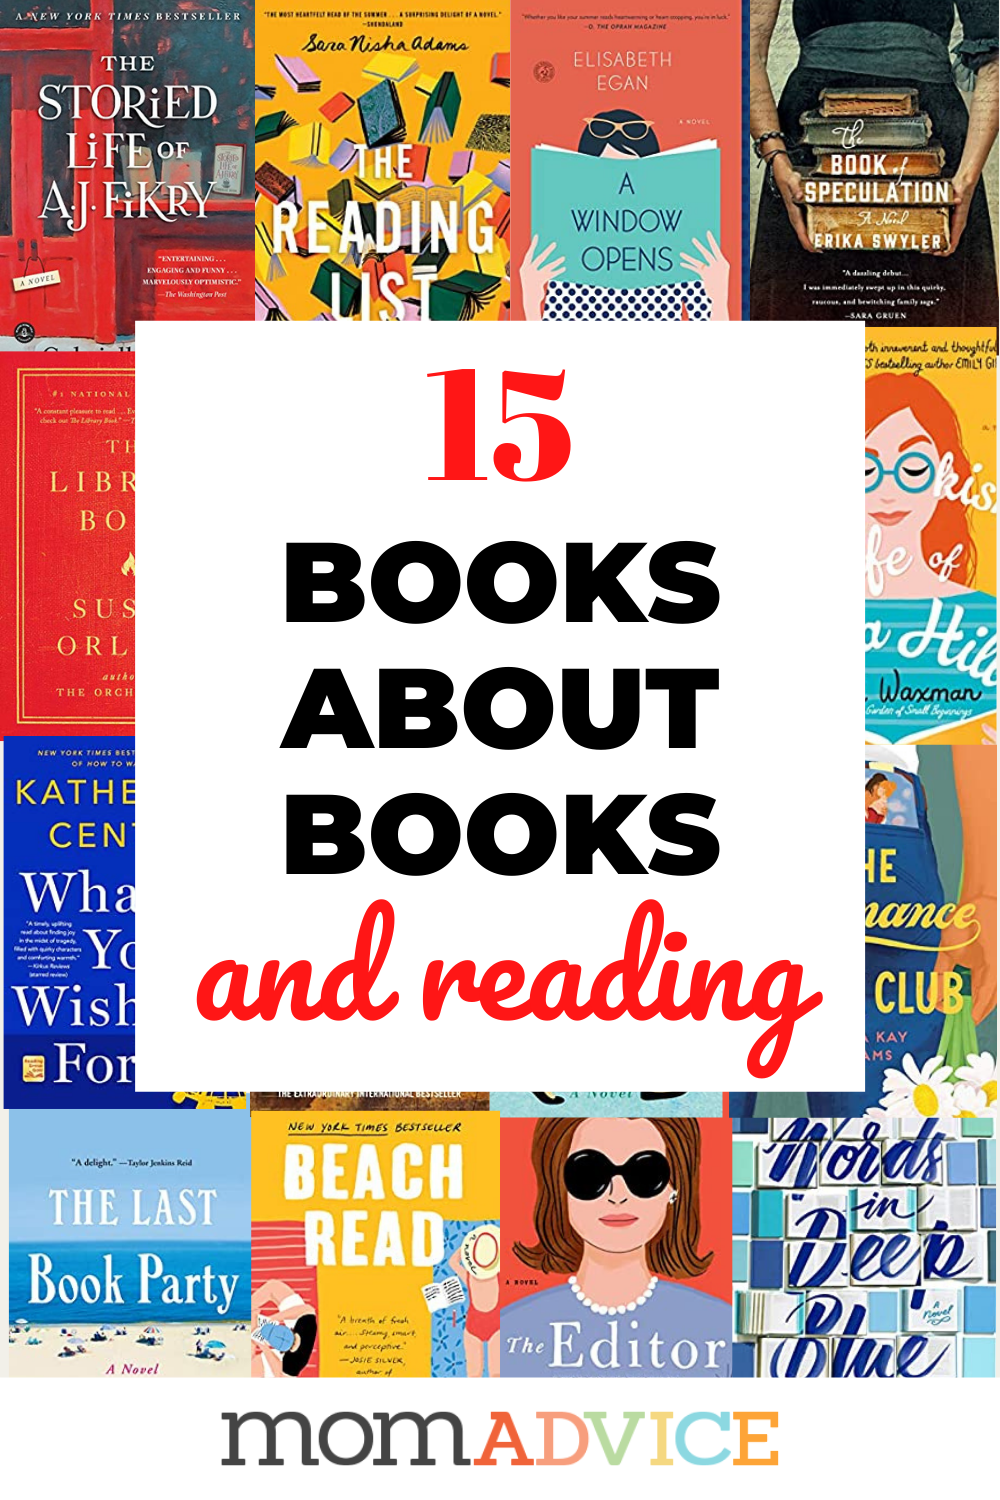 15 Books About Books, Bookstores, and Libraries